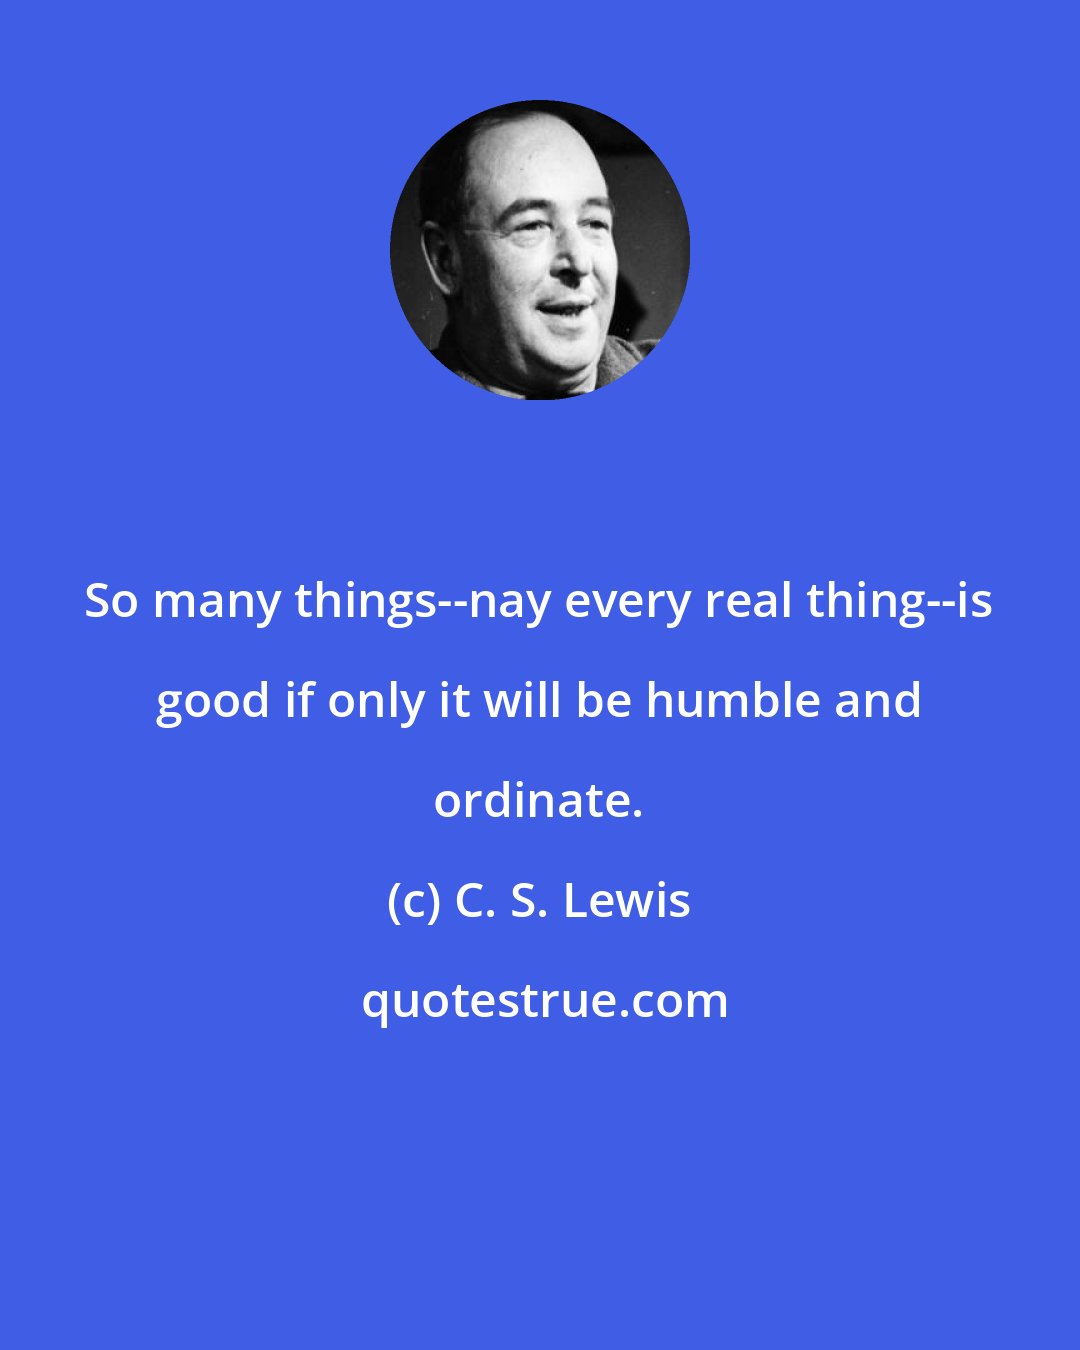 C. S. Lewis: So many things--nay every real thing--is good if only it will be humble and ordinate.